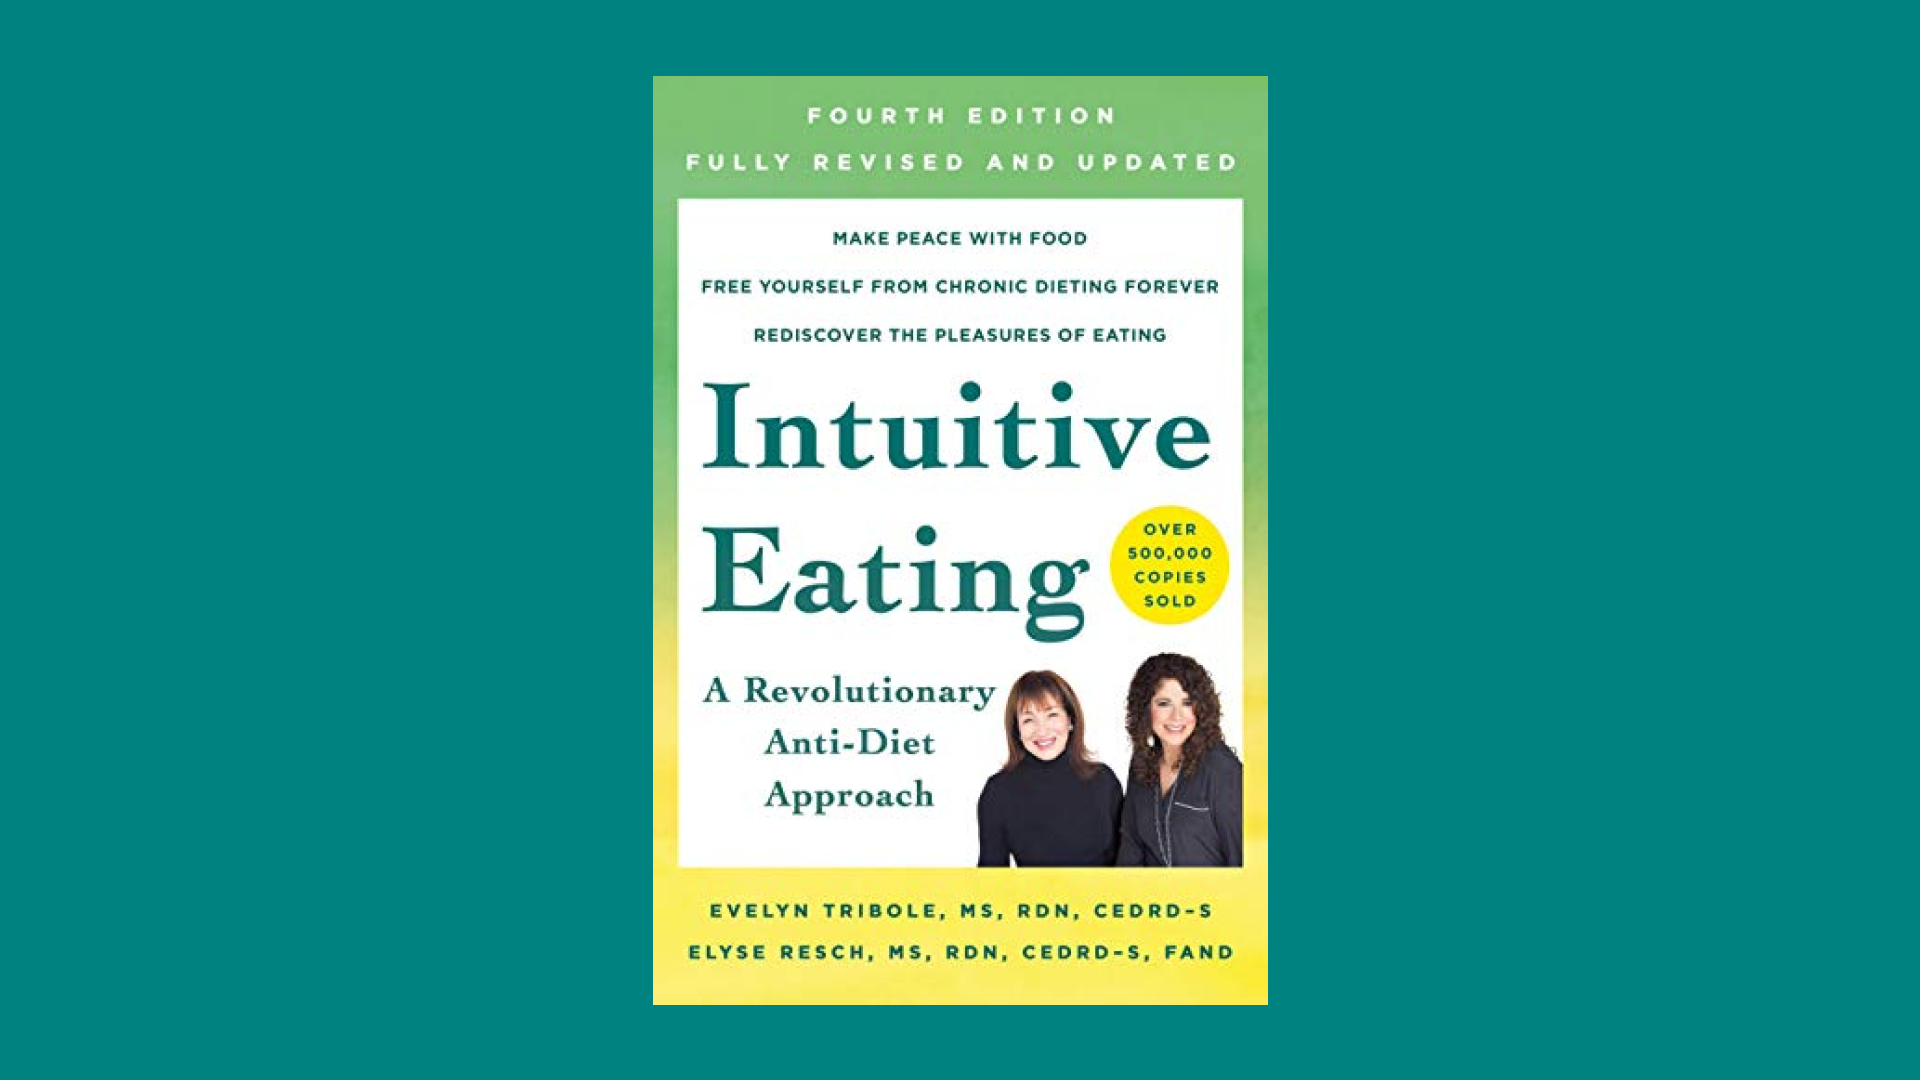 “Intuitive Eating: A Revolutionary Anti-Diet Approach” by Evelyn Tribole and Elyse Resch